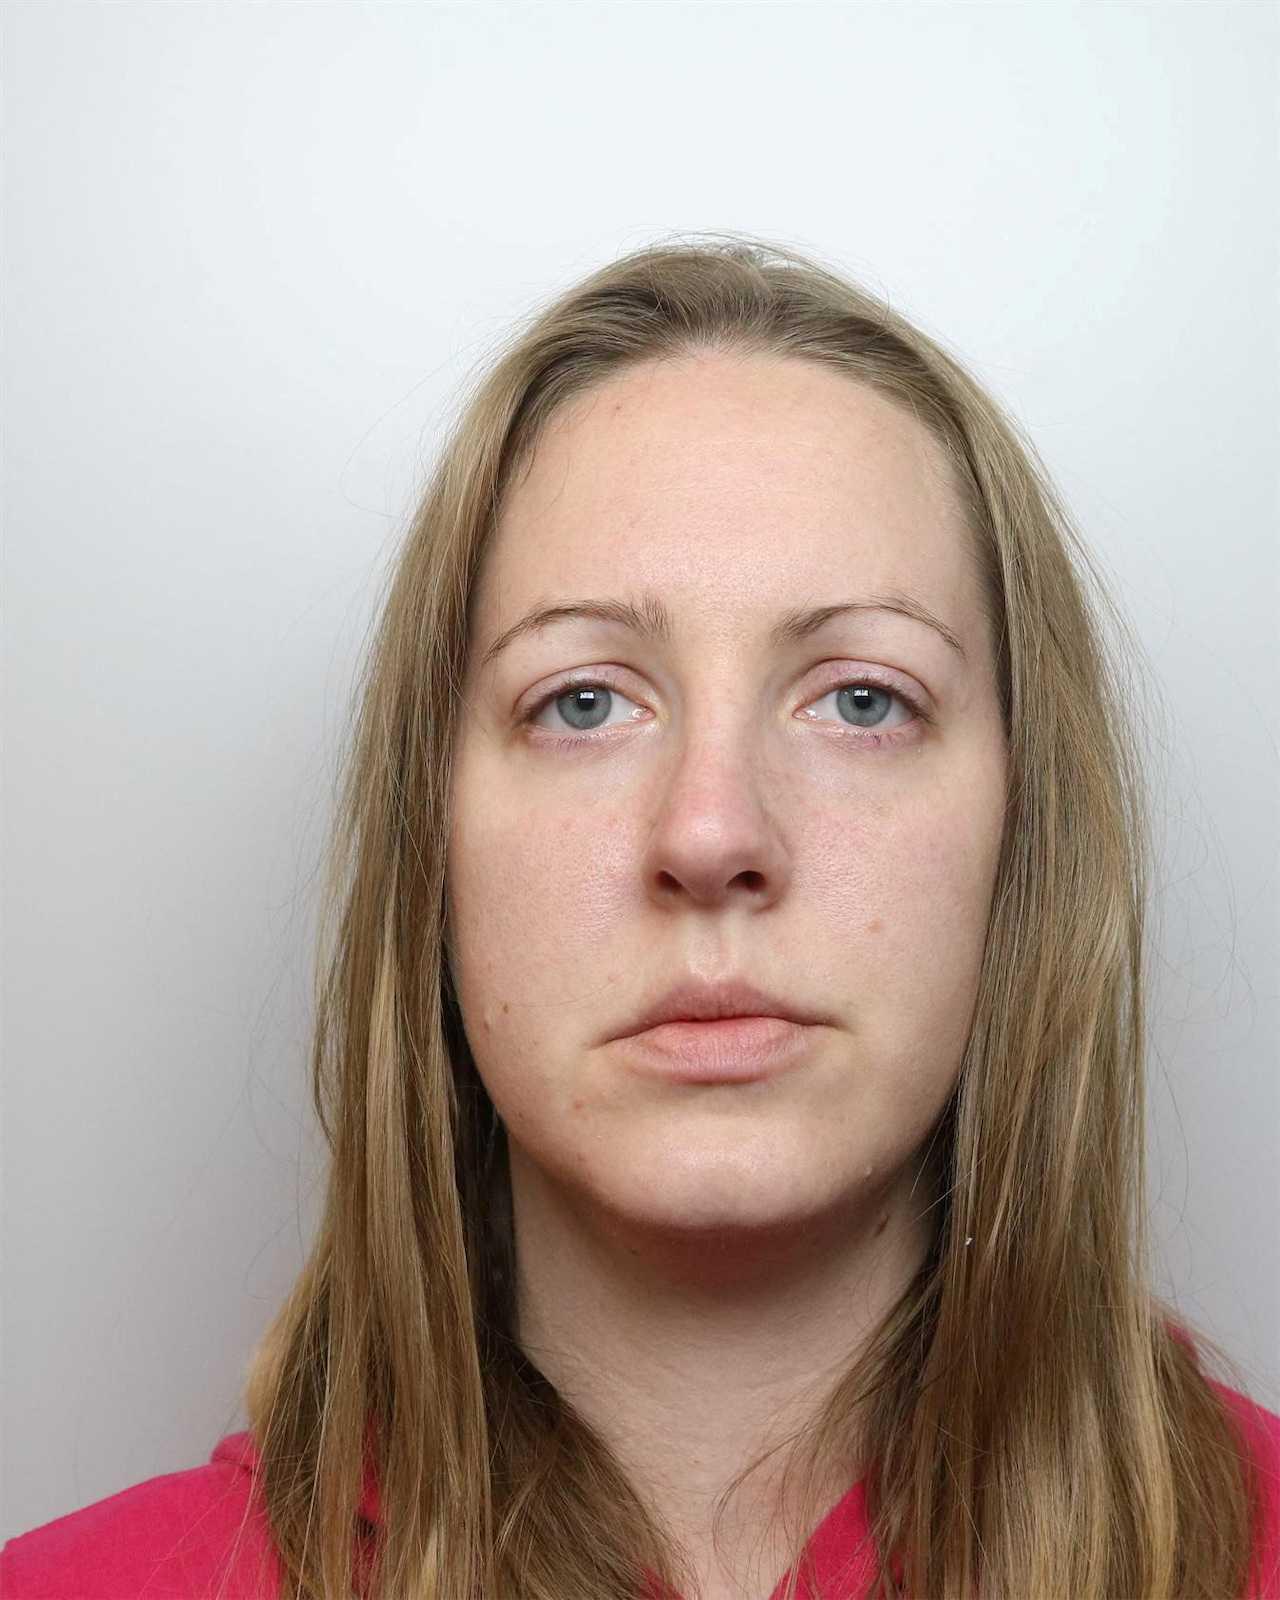 A mugshot of Lucy Letby, in this undated handout image obtained by Reuters on Aug 17. Photo: Reuters